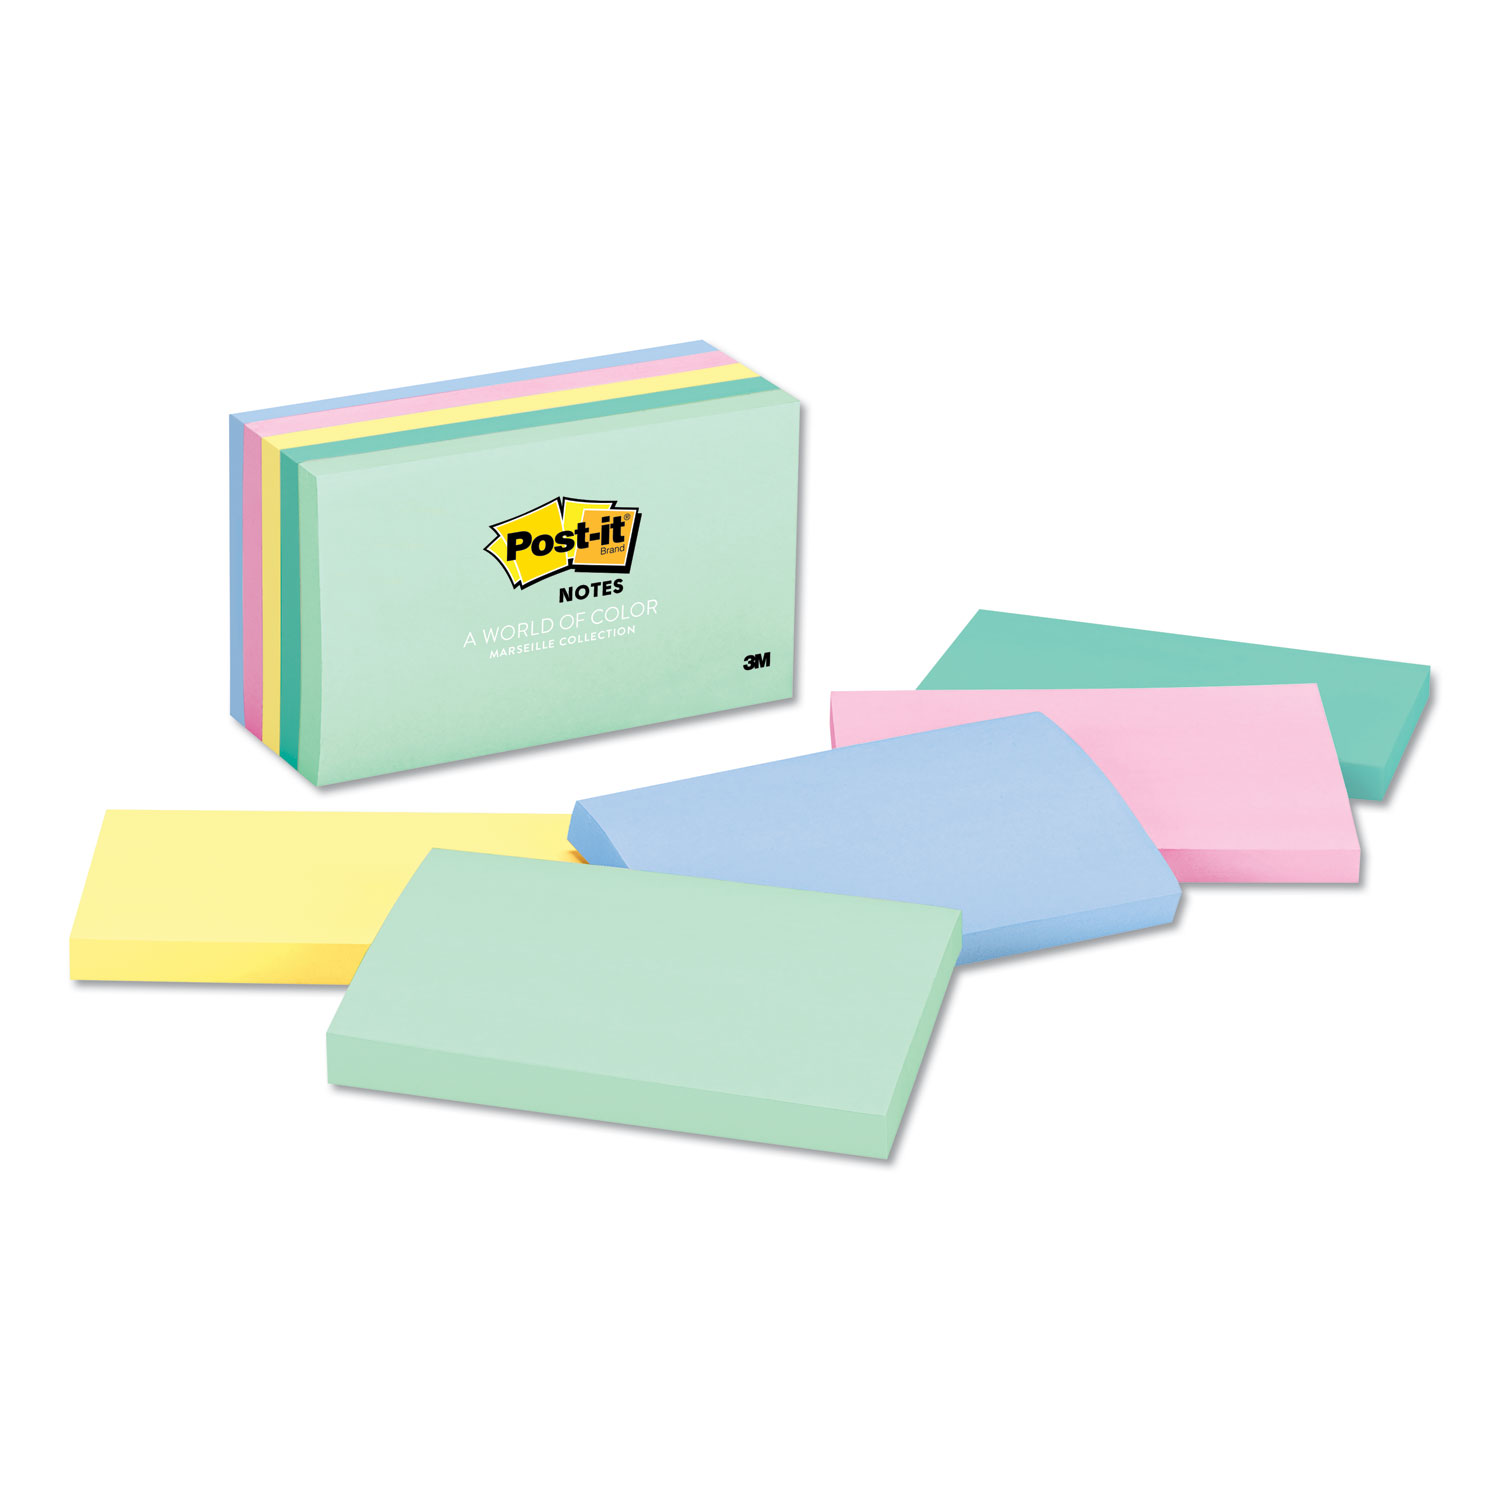  Post-it Notes 655-AST Original Pads in Marseille Colors, 3 x 5, 100-Sheet, 5/Pack (MMM655AST) 